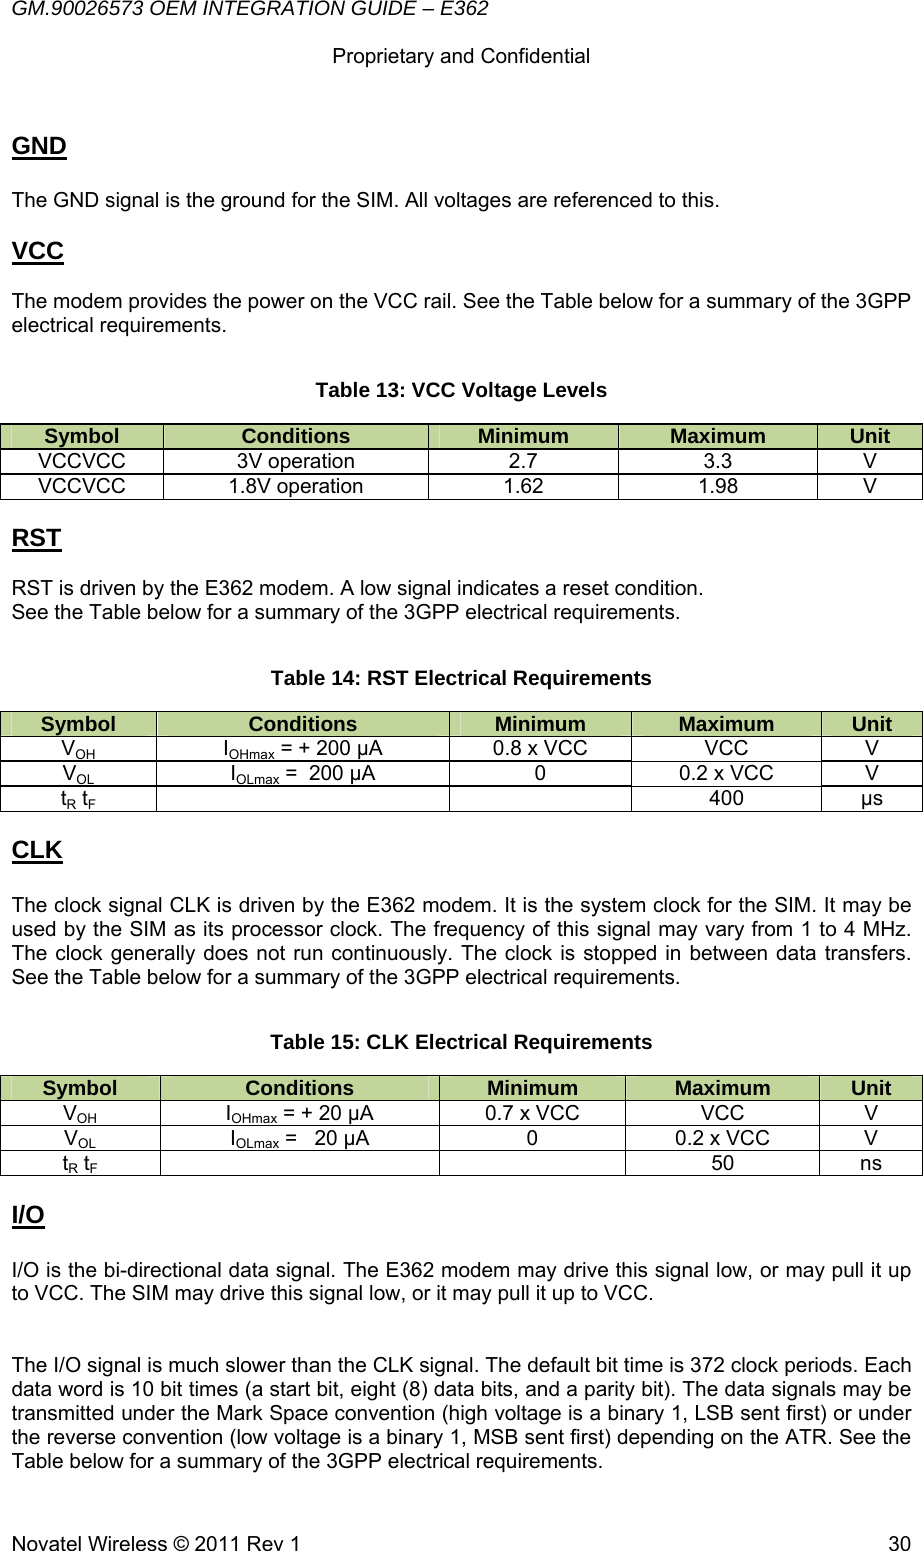 GM.90026573 OEM INTEGRATION GUIDE – E362      Proprietary and Confidential   Novatel Wireless © 2011 Rev 1  30GND  The GND signal is the ground for the SIM. All voltages are referenced to this.  VCC  The modem provides the power on the VCC rail. See the Table below for a summary of the 3GPP electrical requirements. Table 13: VCC Voltage Levels Symbol  Conditions  Minimum  Maximum  Unit VCCVCC 3V operation  2.7  3.3  V VCCVCC 1.8V operation  1.62  1.98  V  RST  RST is driven by the E362 modem. A low signal indicates a reset condition. See the Table below for a summary of the 3GPP electrical requirements. Table 14: RST Electrical Requirements Symbol  Conditions  Minimum  Maximum  Unit VOH IOHmax = + 200 µA  0.8 x VCC  VCC  V VOL IOLmax =  200 µA  0  0.2 x VCC  V tR tF    400 µs  CLK  The clock signal CLK is driven by the E362 modem. It is the system clock for the SIM. It may be used by the SIM as its processor clock. The frequency of this signal may vary from 1 to 4 MHz. The clock generally does not run continuously. The clock is stopped in between data transfers. See the Table below for a summary of the 3GPP electrical requirements. Table 15: CLK Electrical Requirements Symbol  Conditions  Minimum  Maximum  Unit VOH IOHmax = + 20 µA  0.7 x VCC  VCC  V VOL IOLmax =   20 µA  0  0.2 x VCC  V tR tF    50 ns  I/O  I/O is the bi-directional data signal. The E362 modem may drive this signal low, or may pull it up to VCC. The SIM may drive this signal low, or it may pull it up to VCC.     The I/O signal is much slower than the CLK signal. The default bit time is 372 clock periods. Each data word is 10 bit times (a start bit, eight (8) data bits, and a parity bit). The data signals may be transmitted under the Mark Space convention (high voltage is a binary 1, LSB sent first) or under the reverse convention (low voltage is a binary 1, MSB sent first) depending on the ATR. See the Table below for a summary of the 3GPP electrical requirements. 